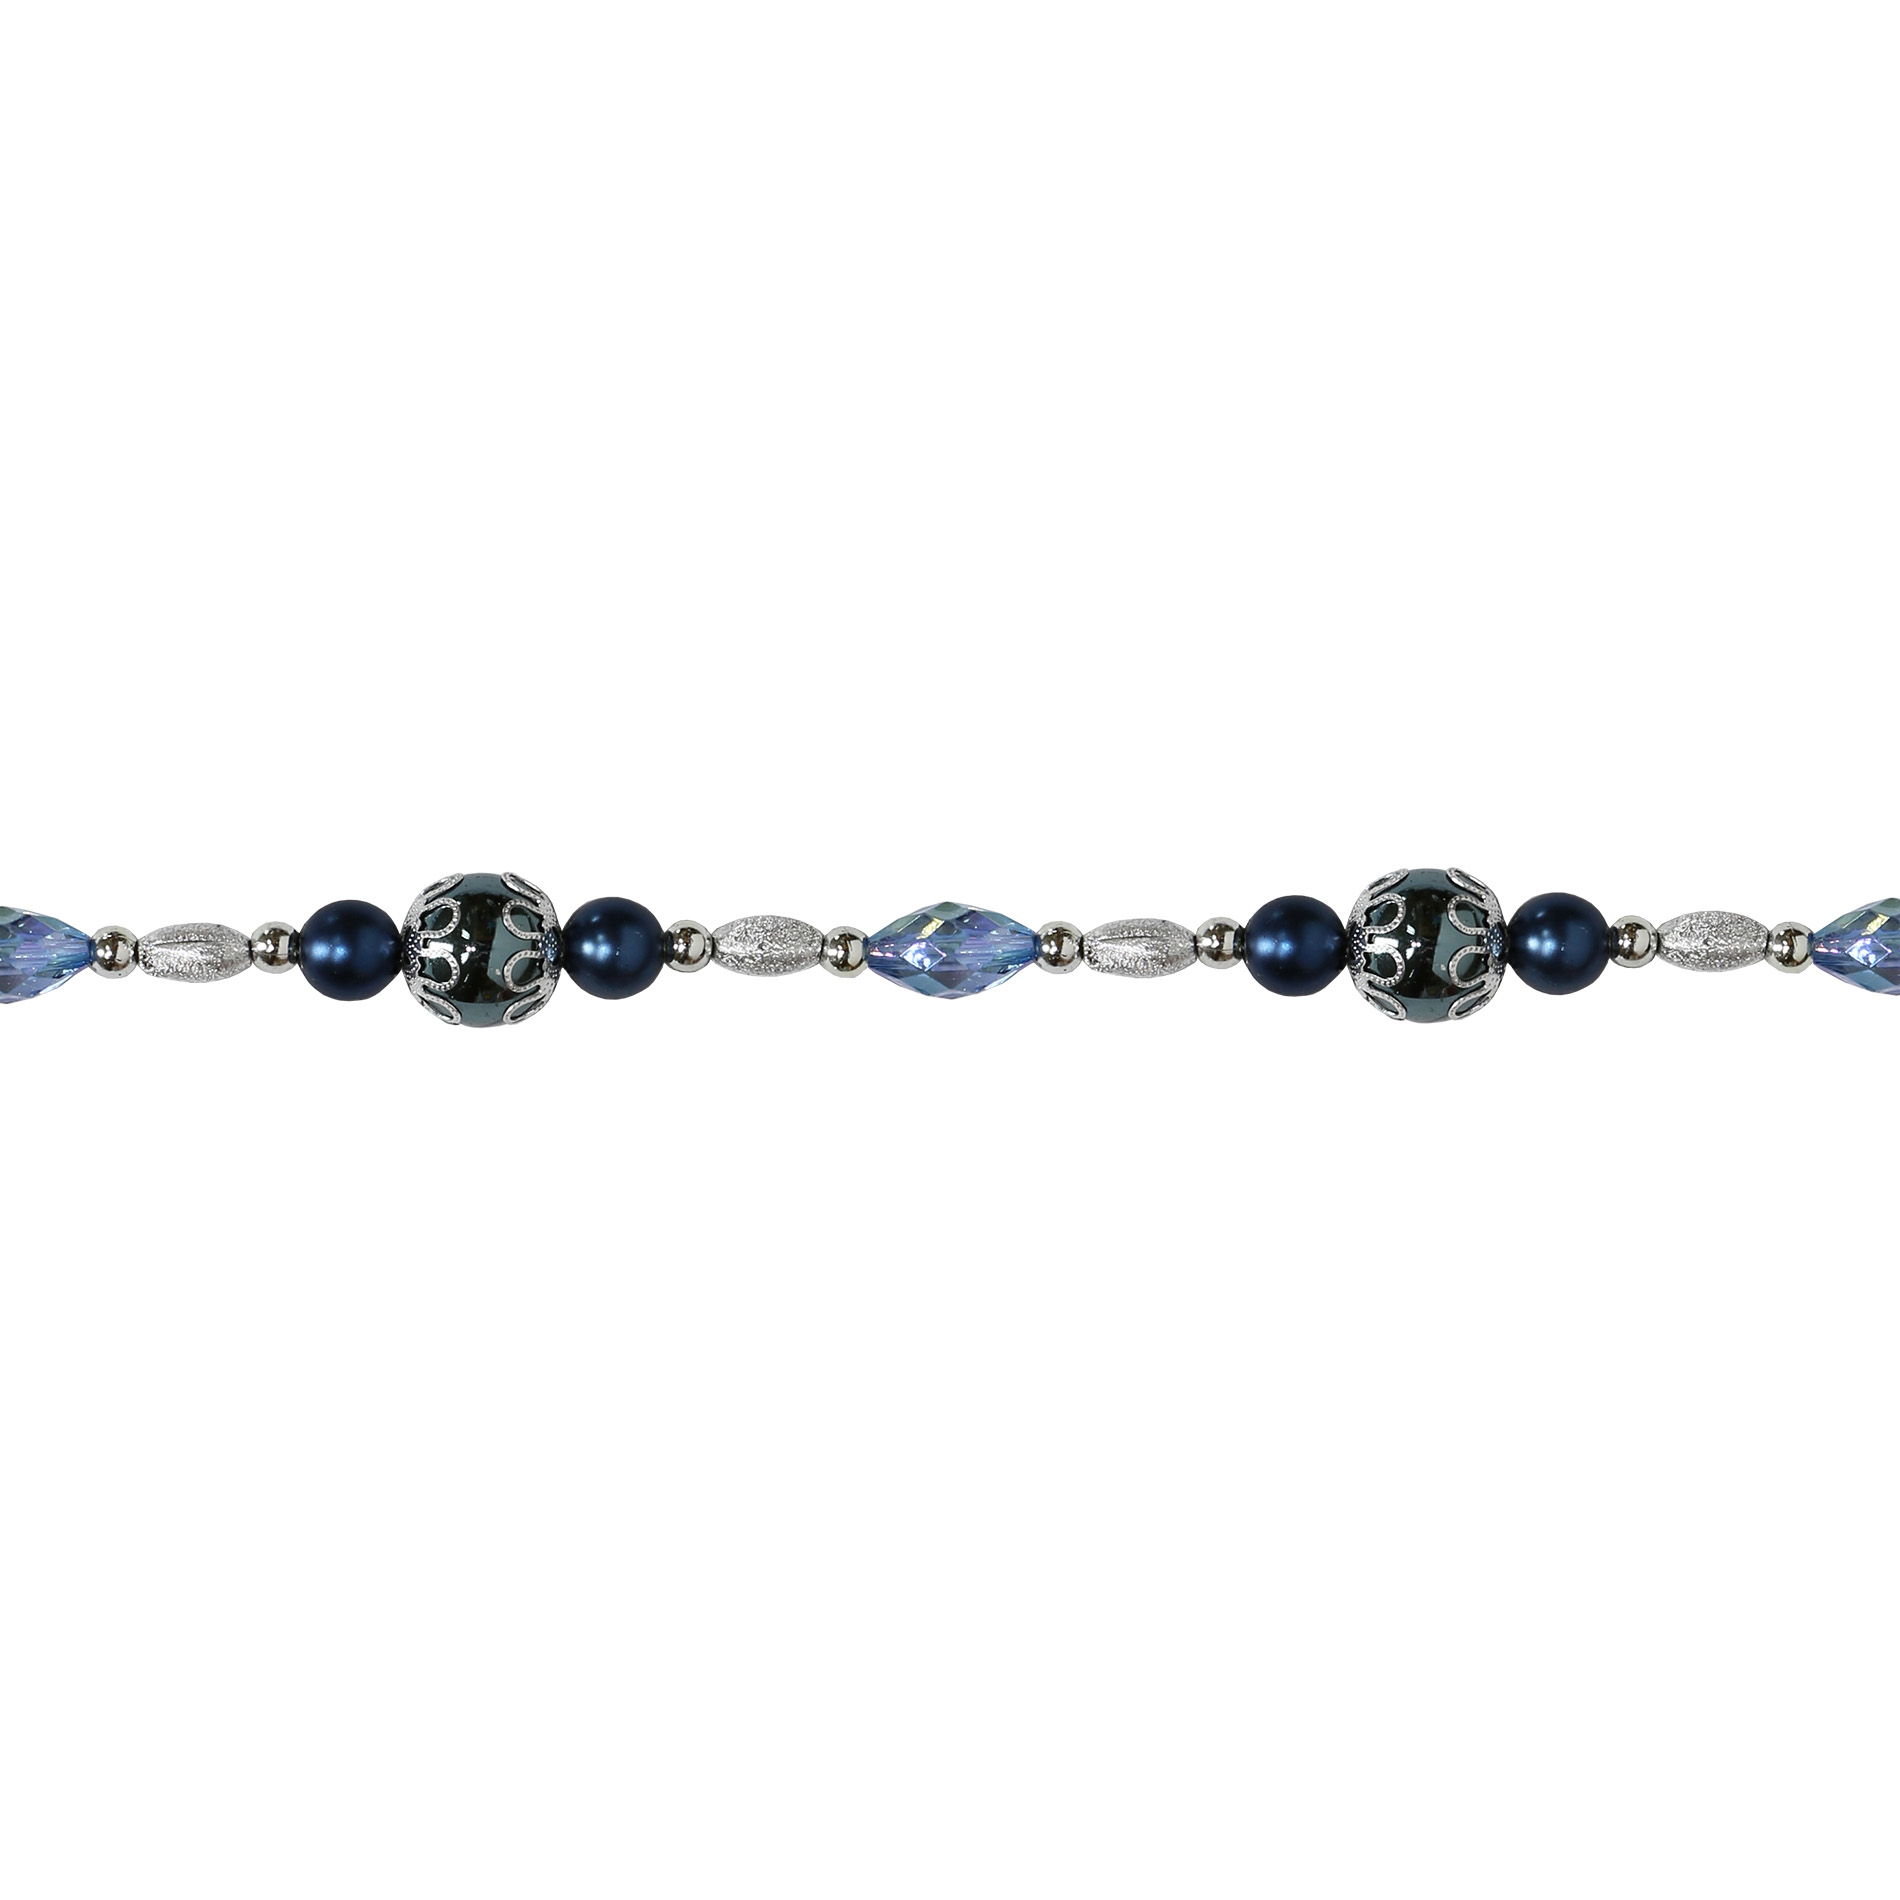 Donner & Blitzen Incorporated 8 ' Esquire Bead Christmas Garland- Blue